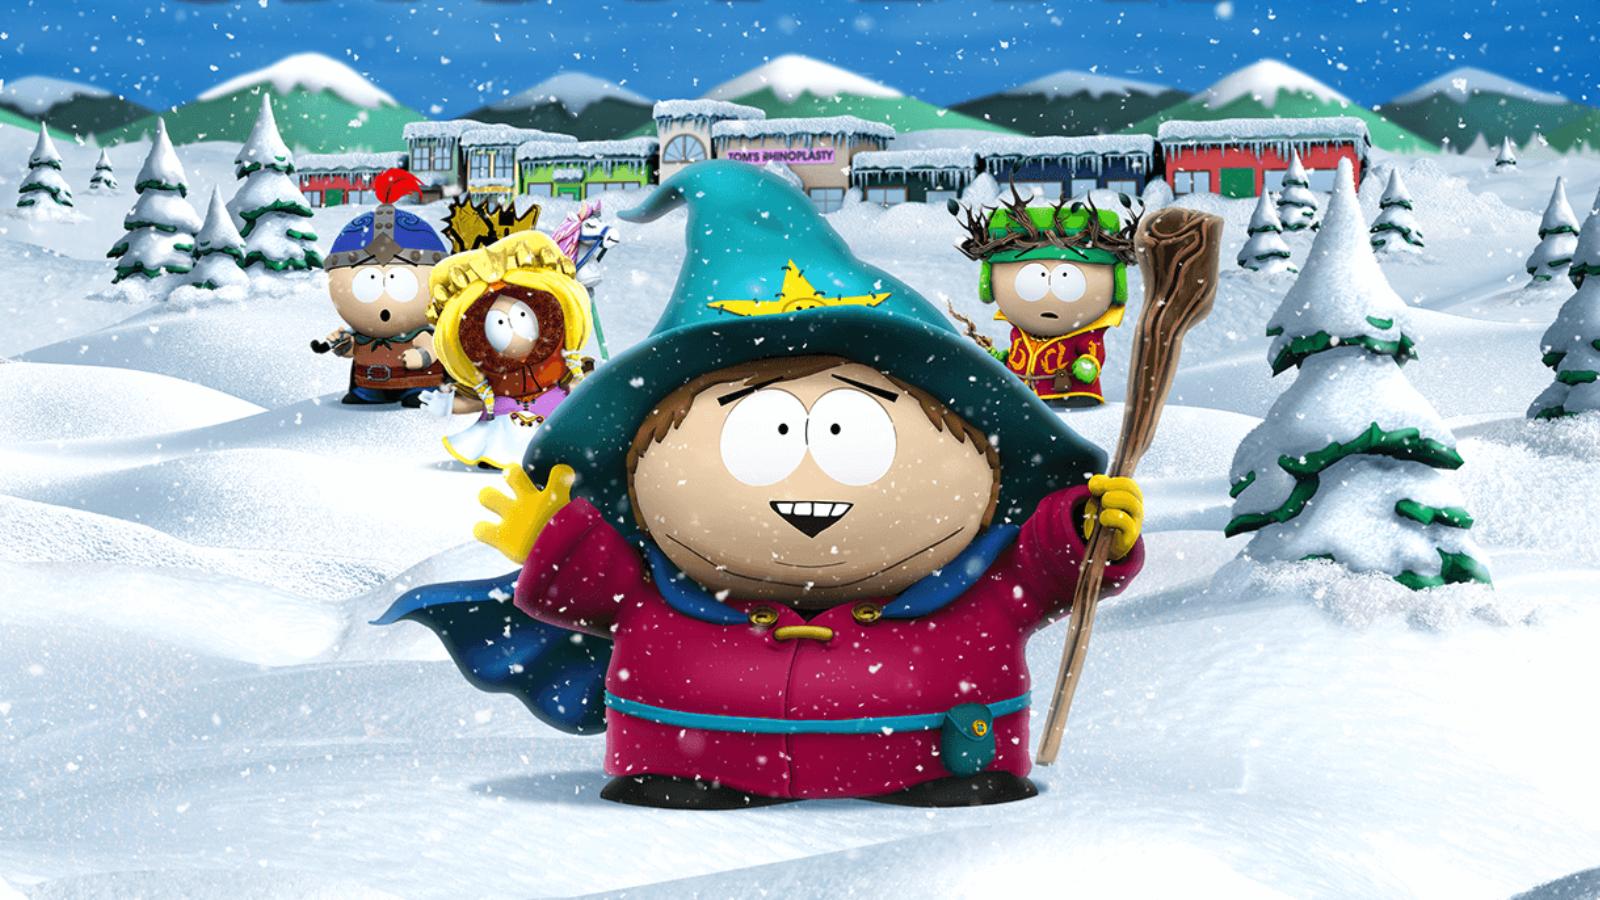 South Park Snow Day cover art